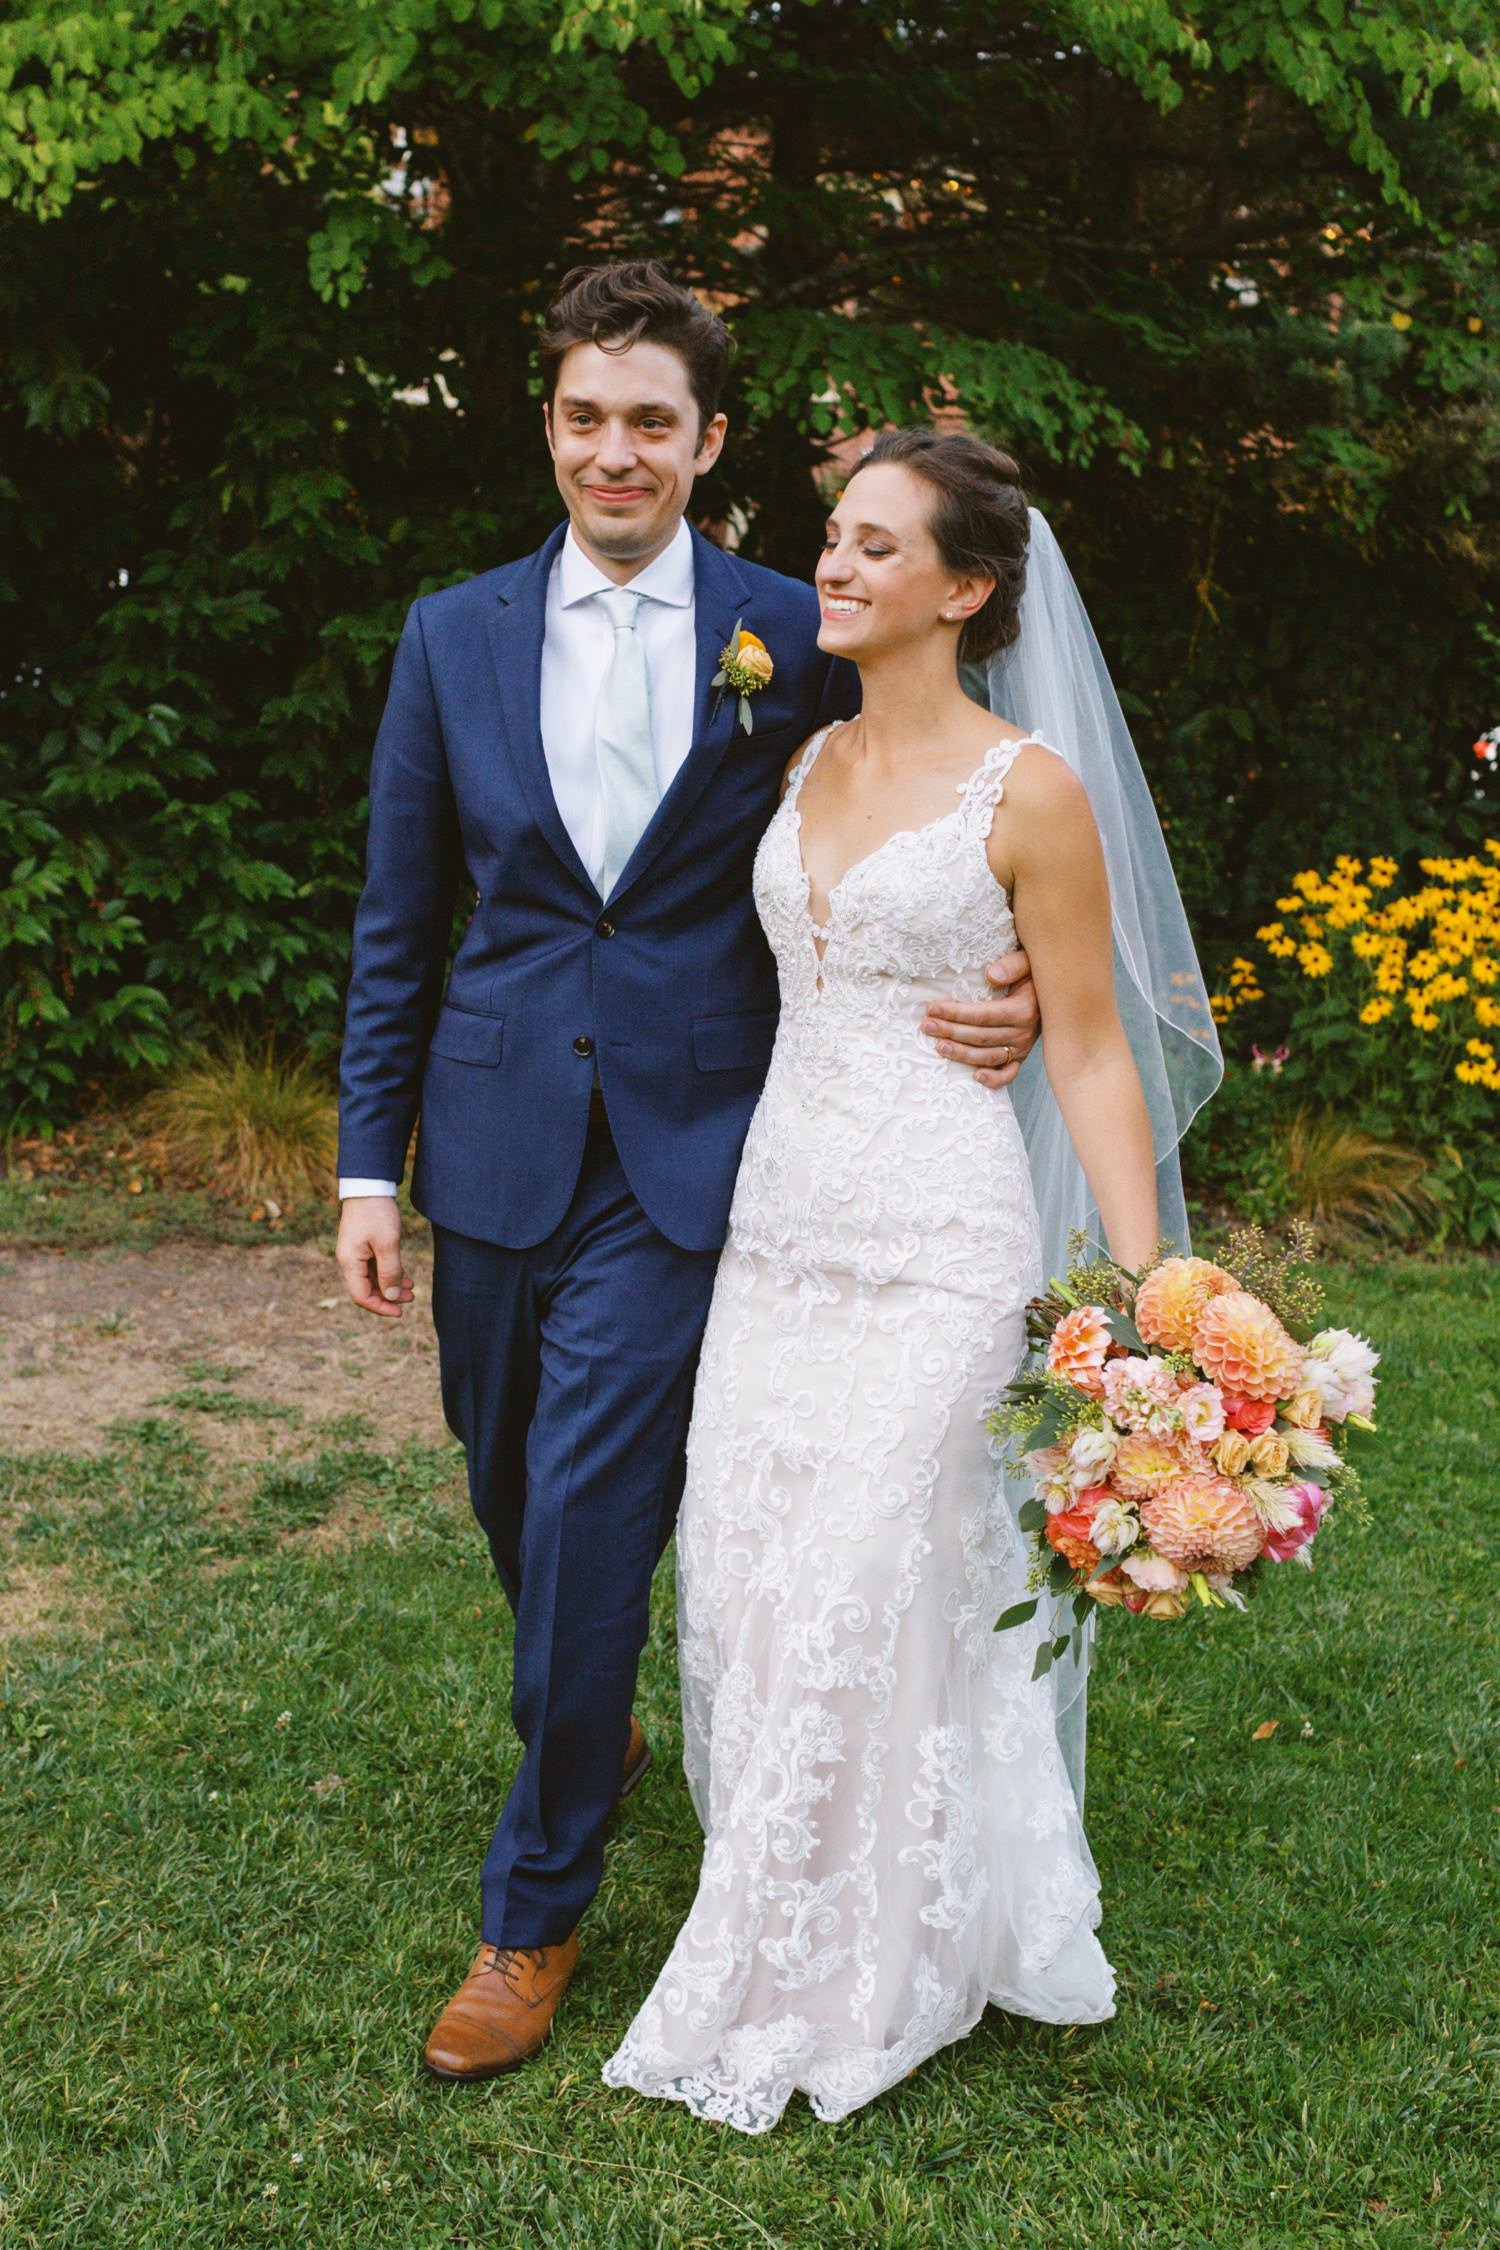  groom in navy blue suit and bride in white dress holding bouquet of pink and orange flowers walk together 